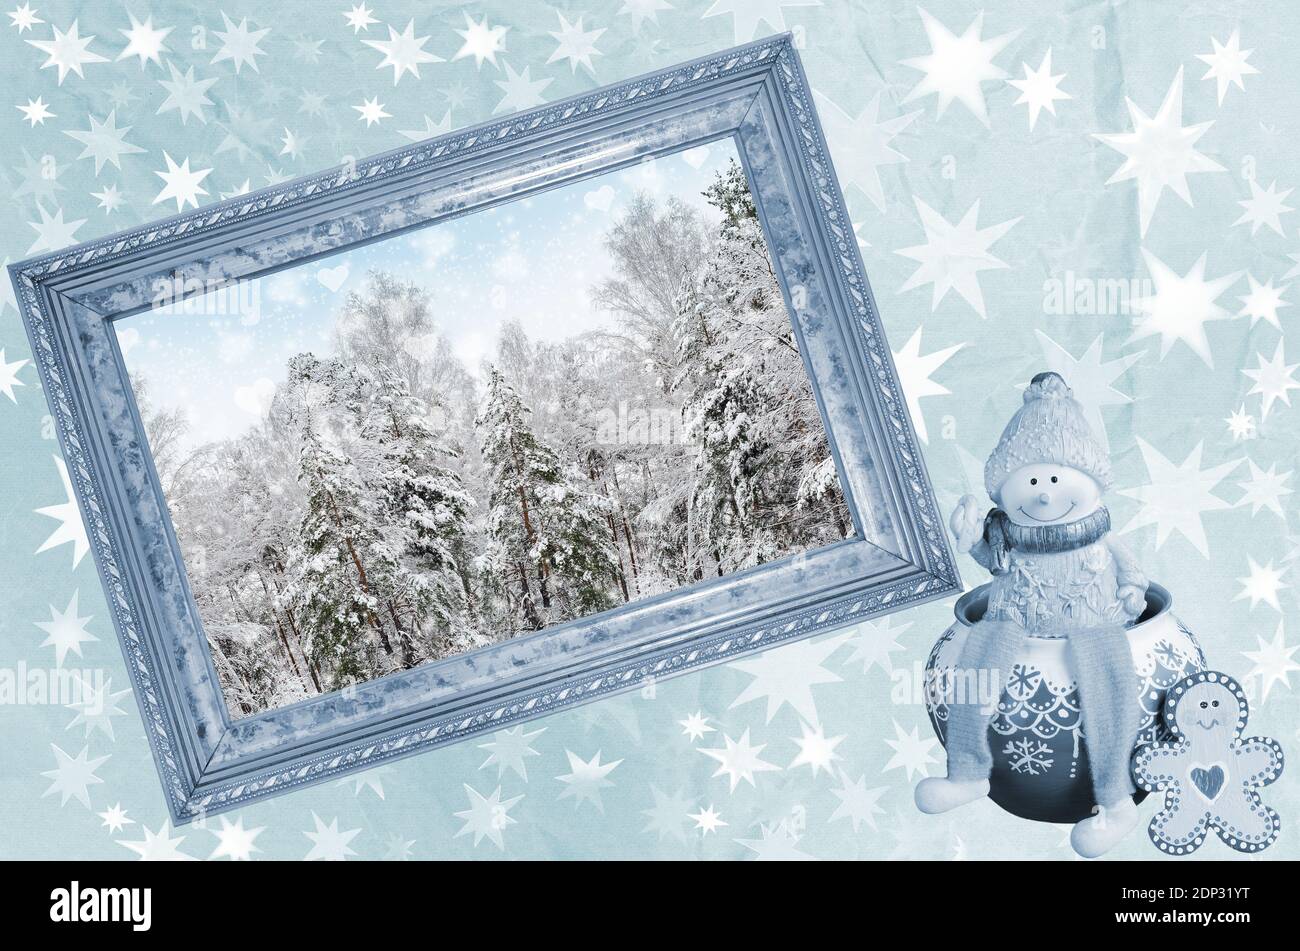 https://c8.alamy.com/comp/2DP31YT/photo-frame-with-winter-landscape-and-christmas-tree-toys-on-blue-crumpled-paper-in-the-stars-2DP31YT.jpg